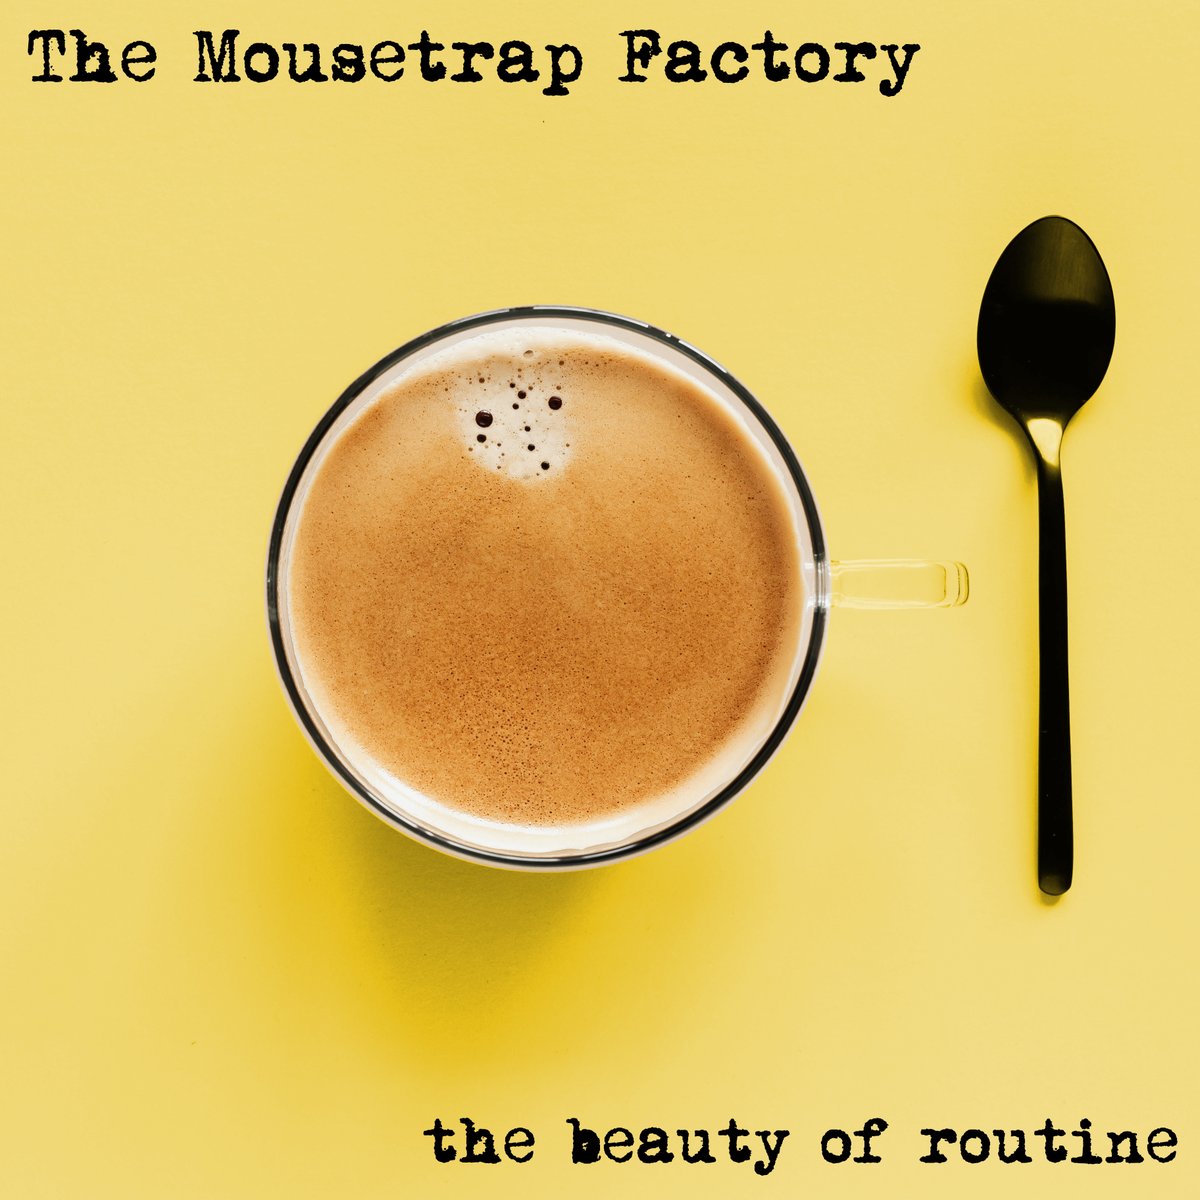 The Mousetrap Factory with Waiting/Monologue from album The Beauty of Routine now playing on the #progmill @progzilla progzilla.com/listen